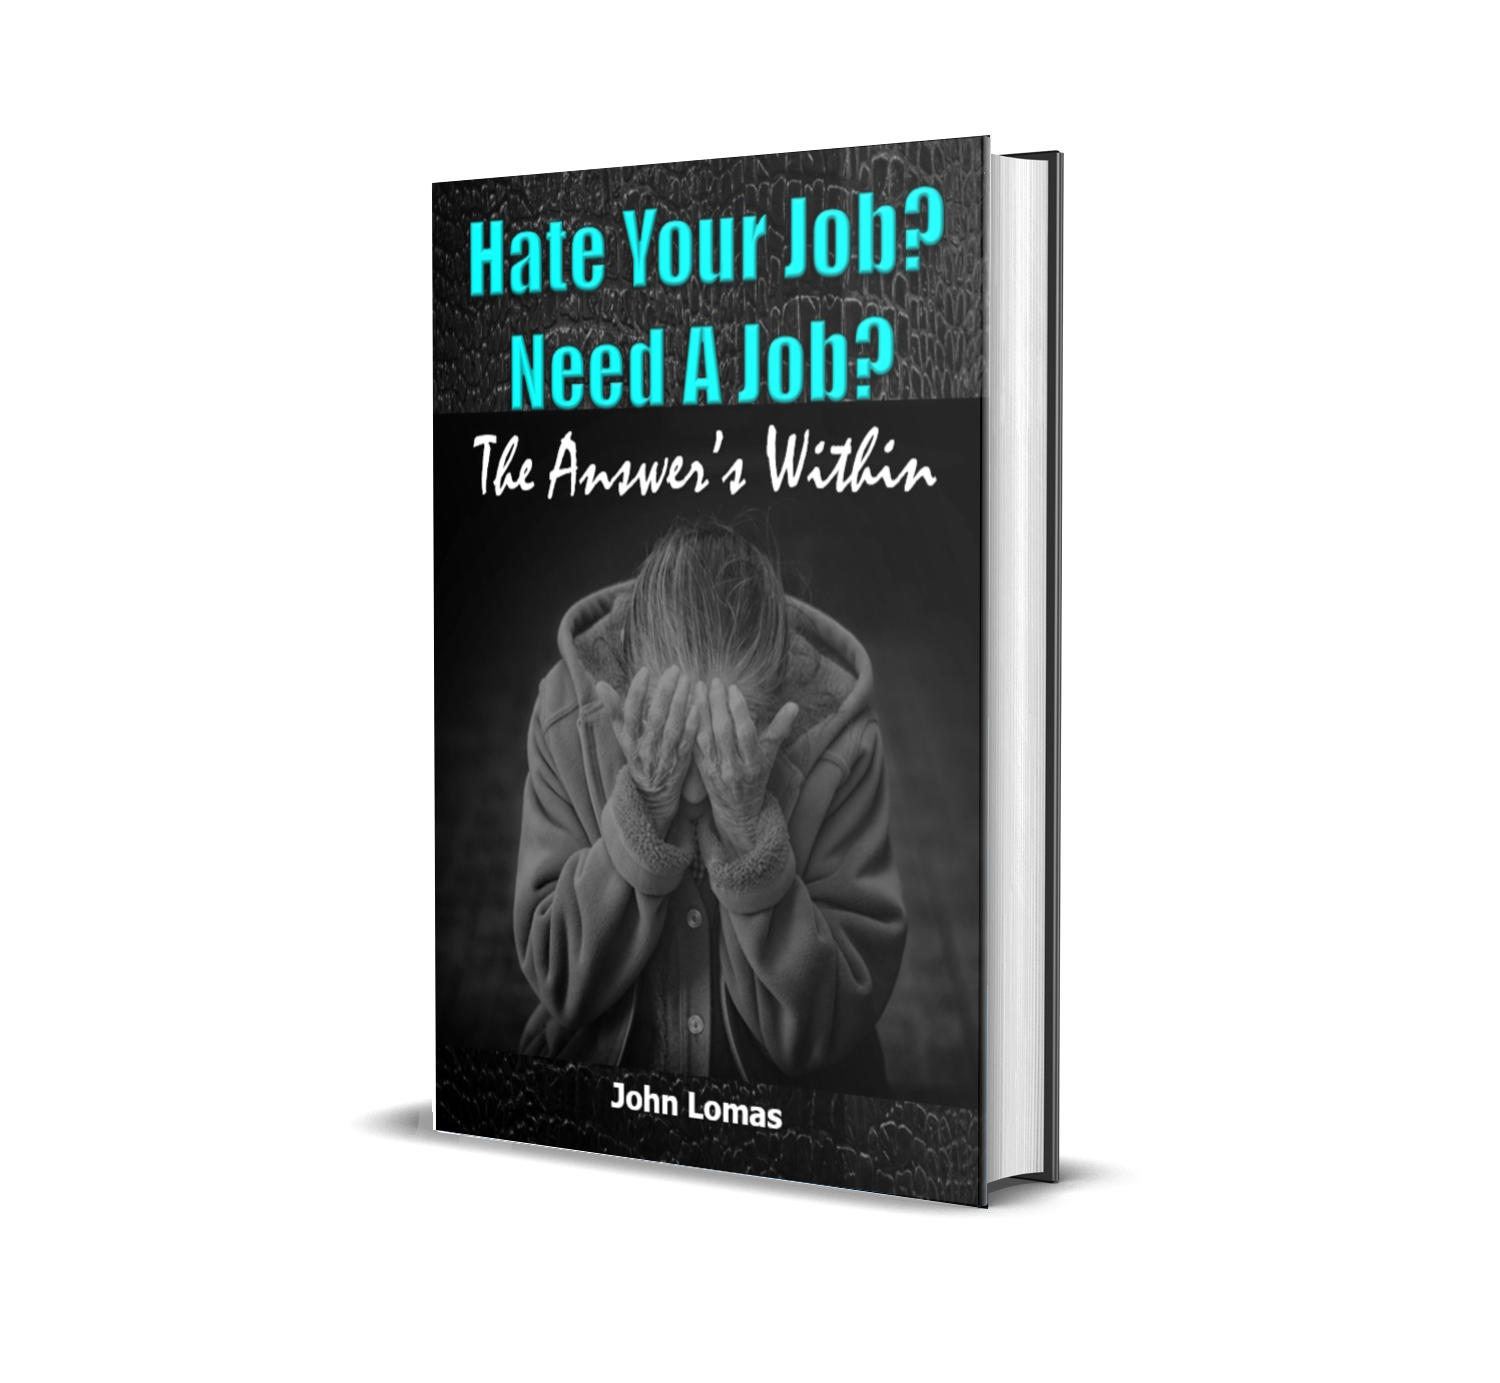 Hate Your Job? Need A Job? The Answer's Within